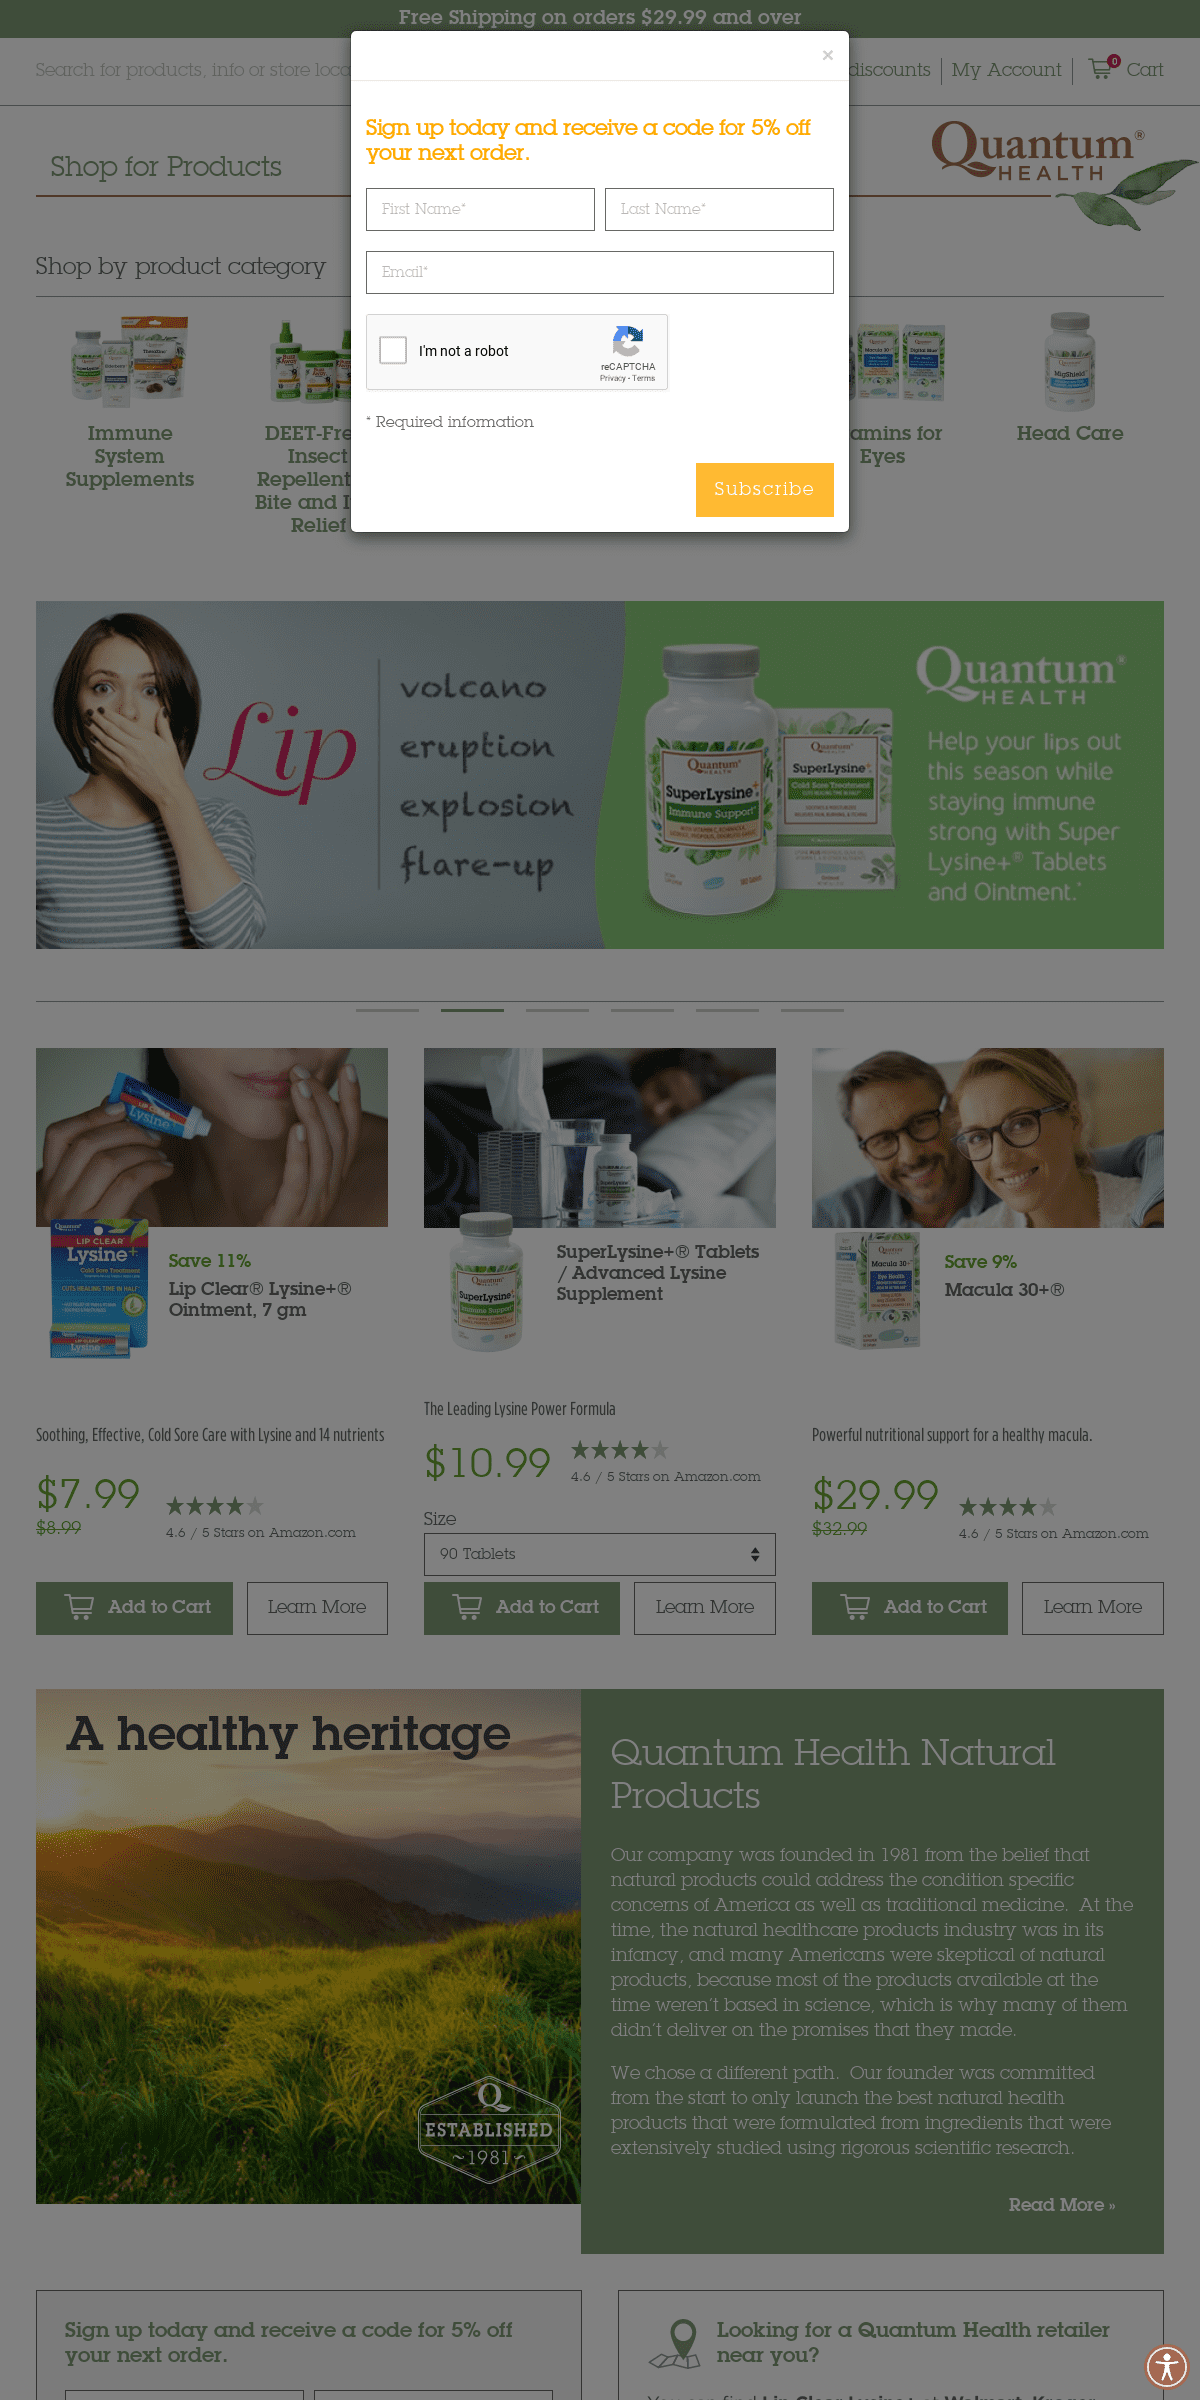 A complete backup of quantumhealth.com